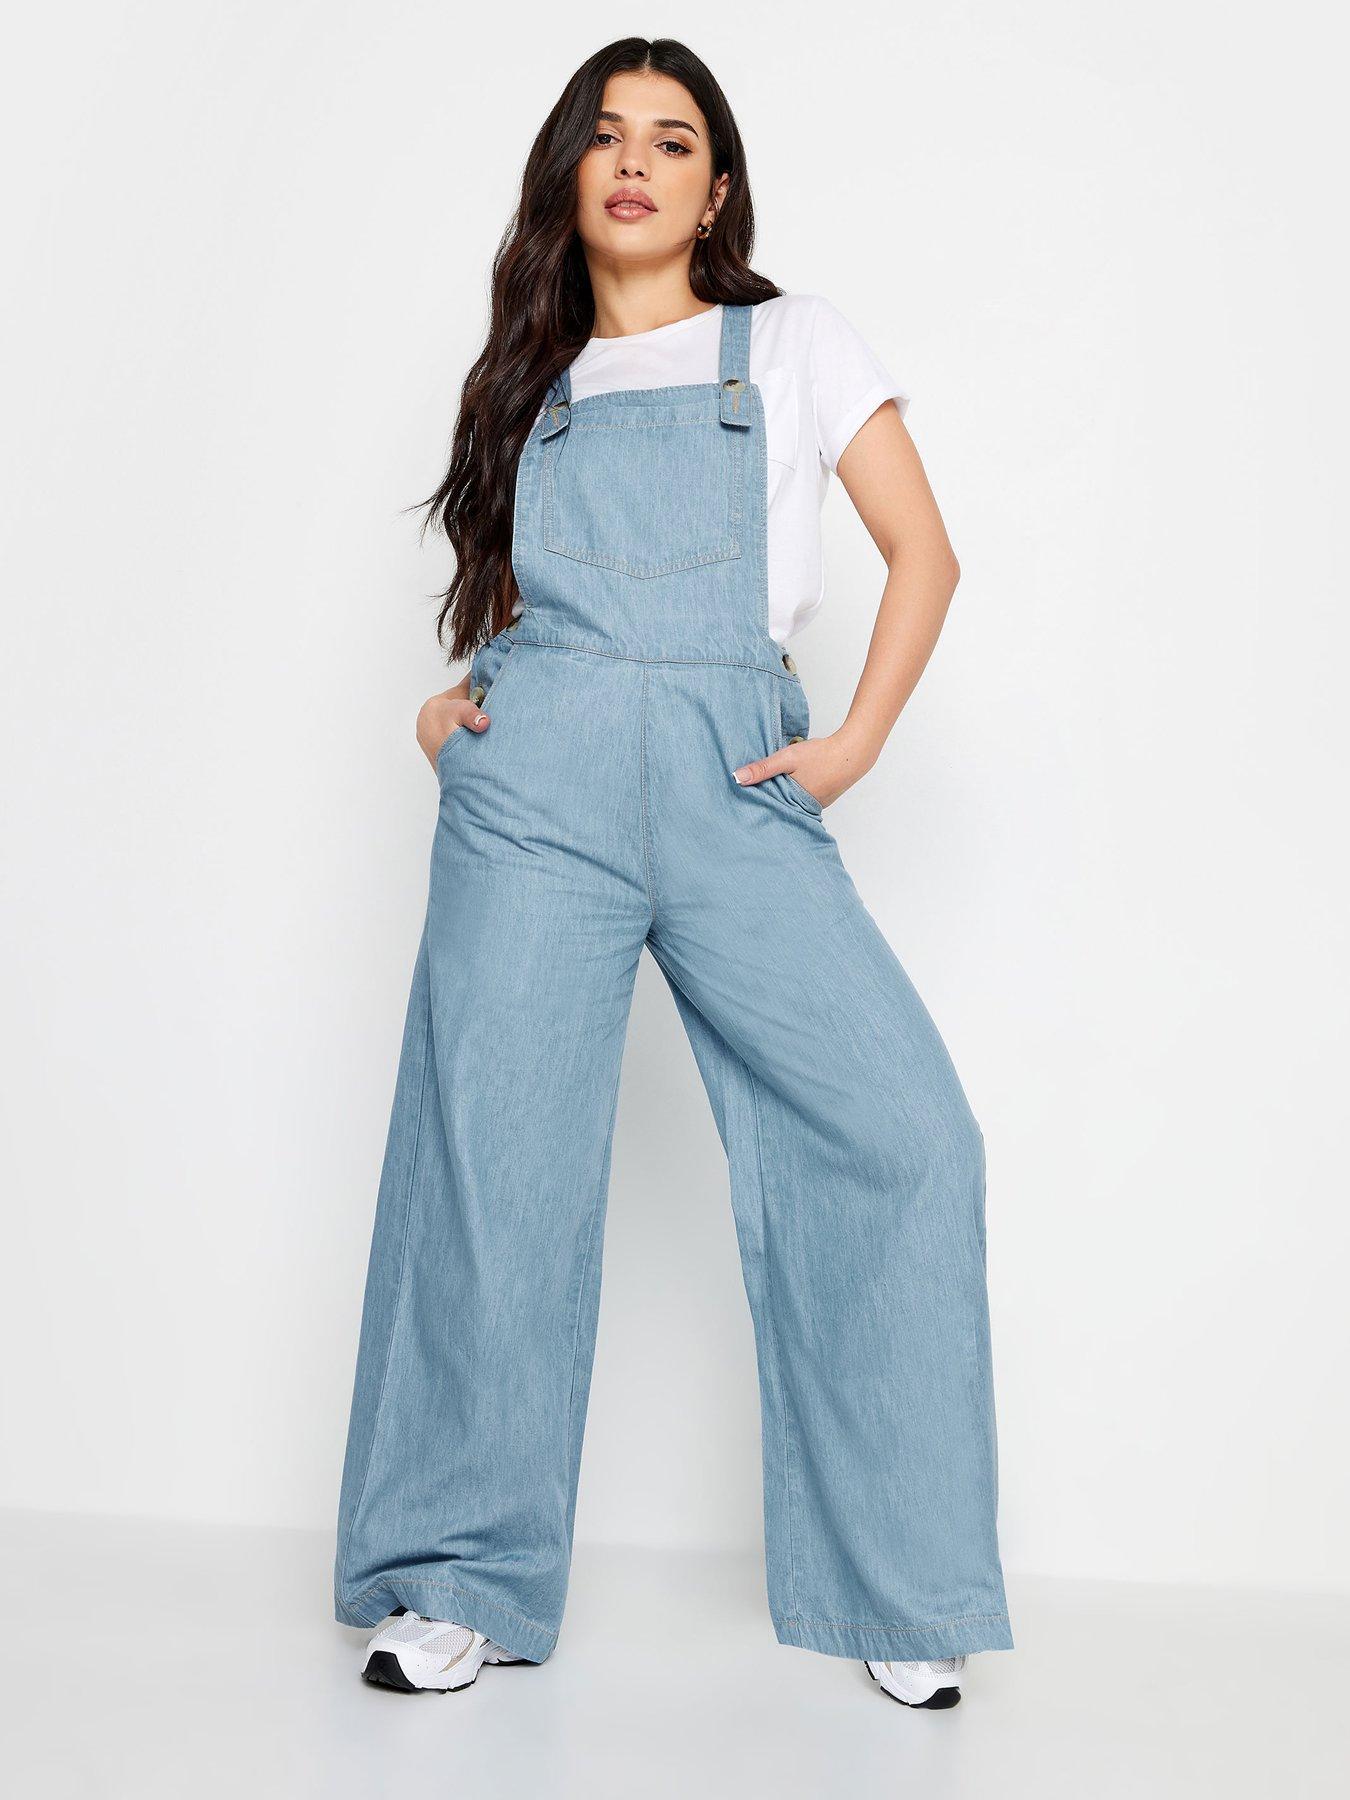 Wash Clothing Company Daphne Women's Dungarees with Cargo Pockets Denim  Dungarees Jumpsuit